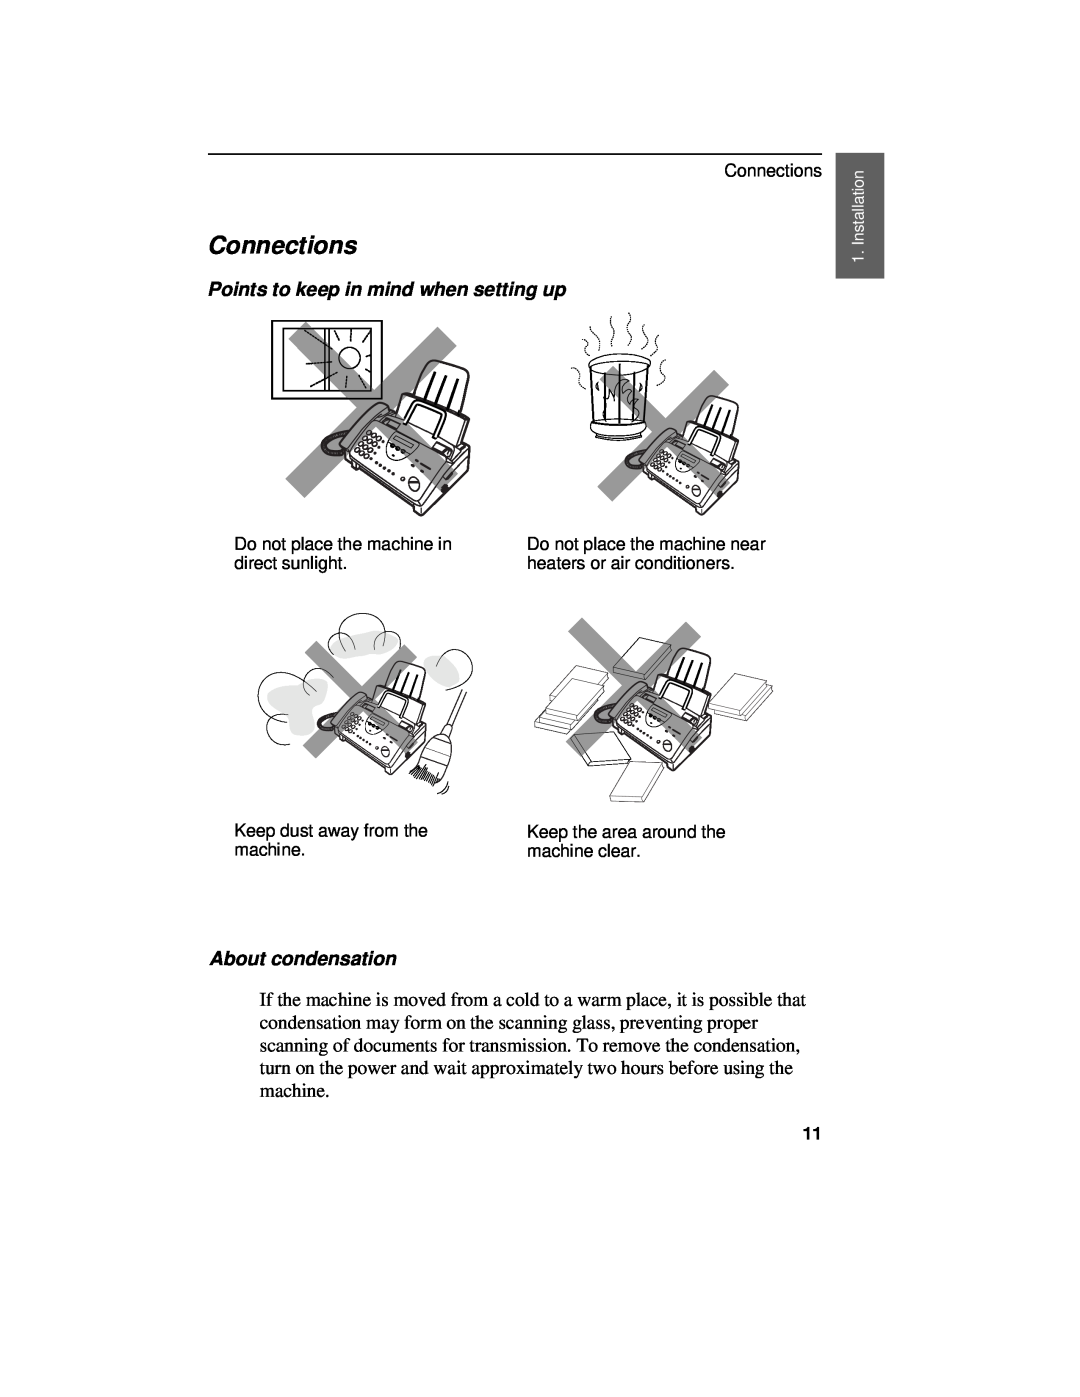 Sharp UX-460 operation manual Connections, Points to keep in mind when setting up, About condensation 